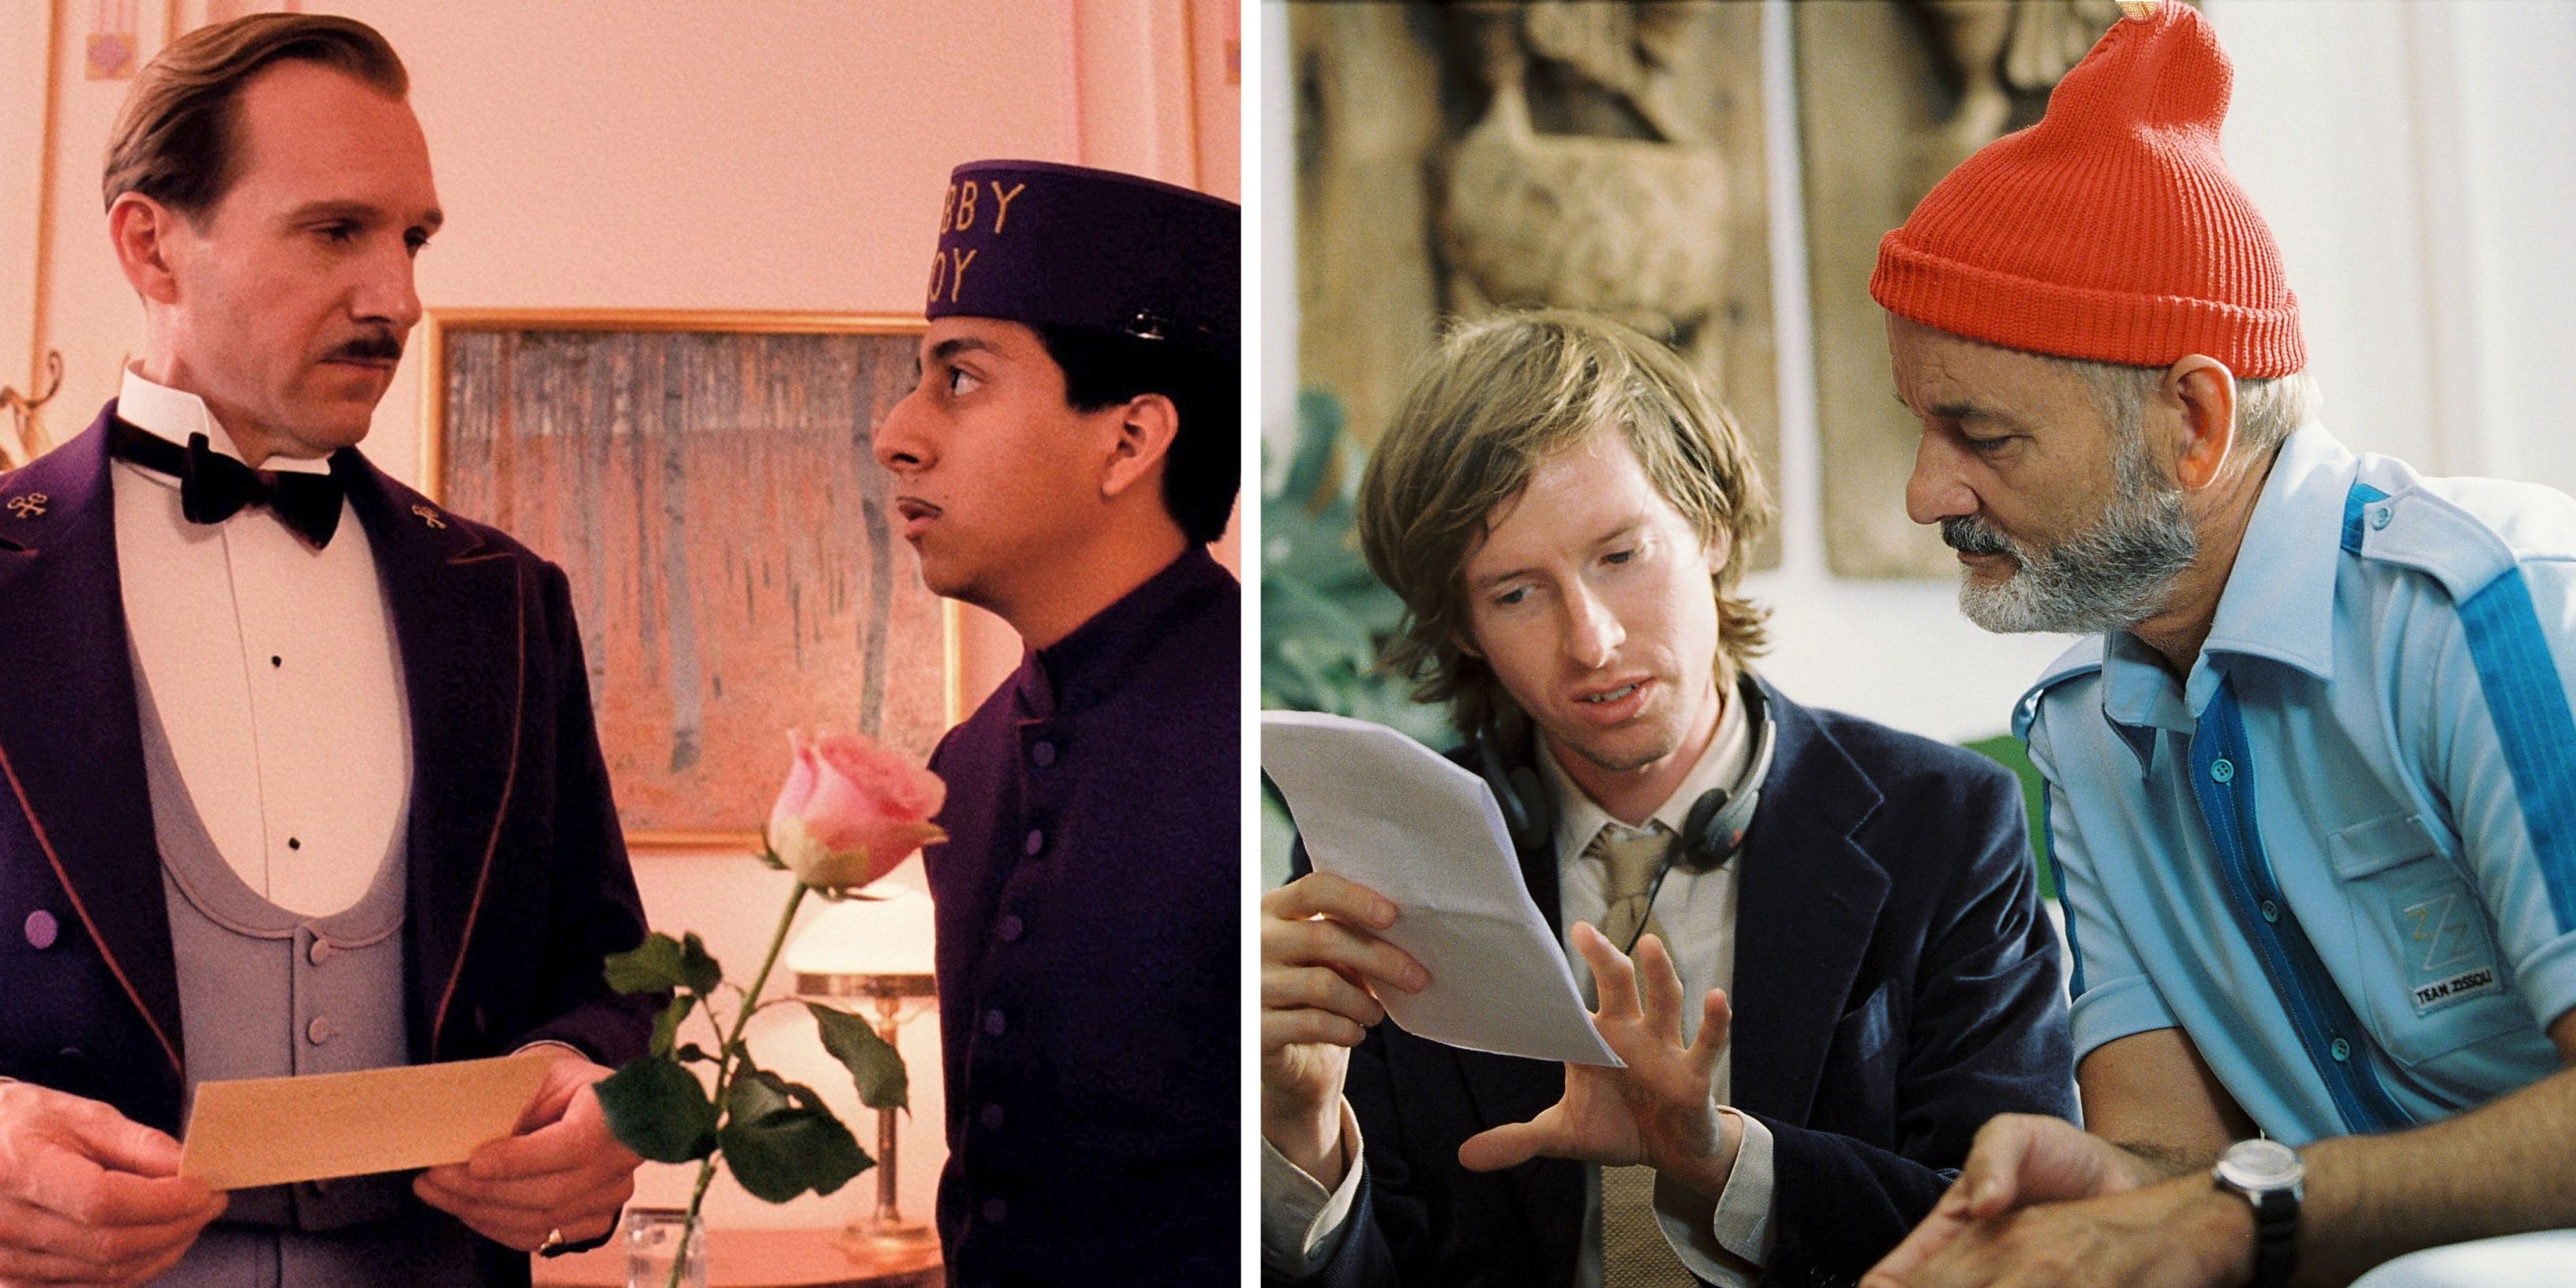 Wes Anderson's 10 Best Movies, Ranked According To IMDb